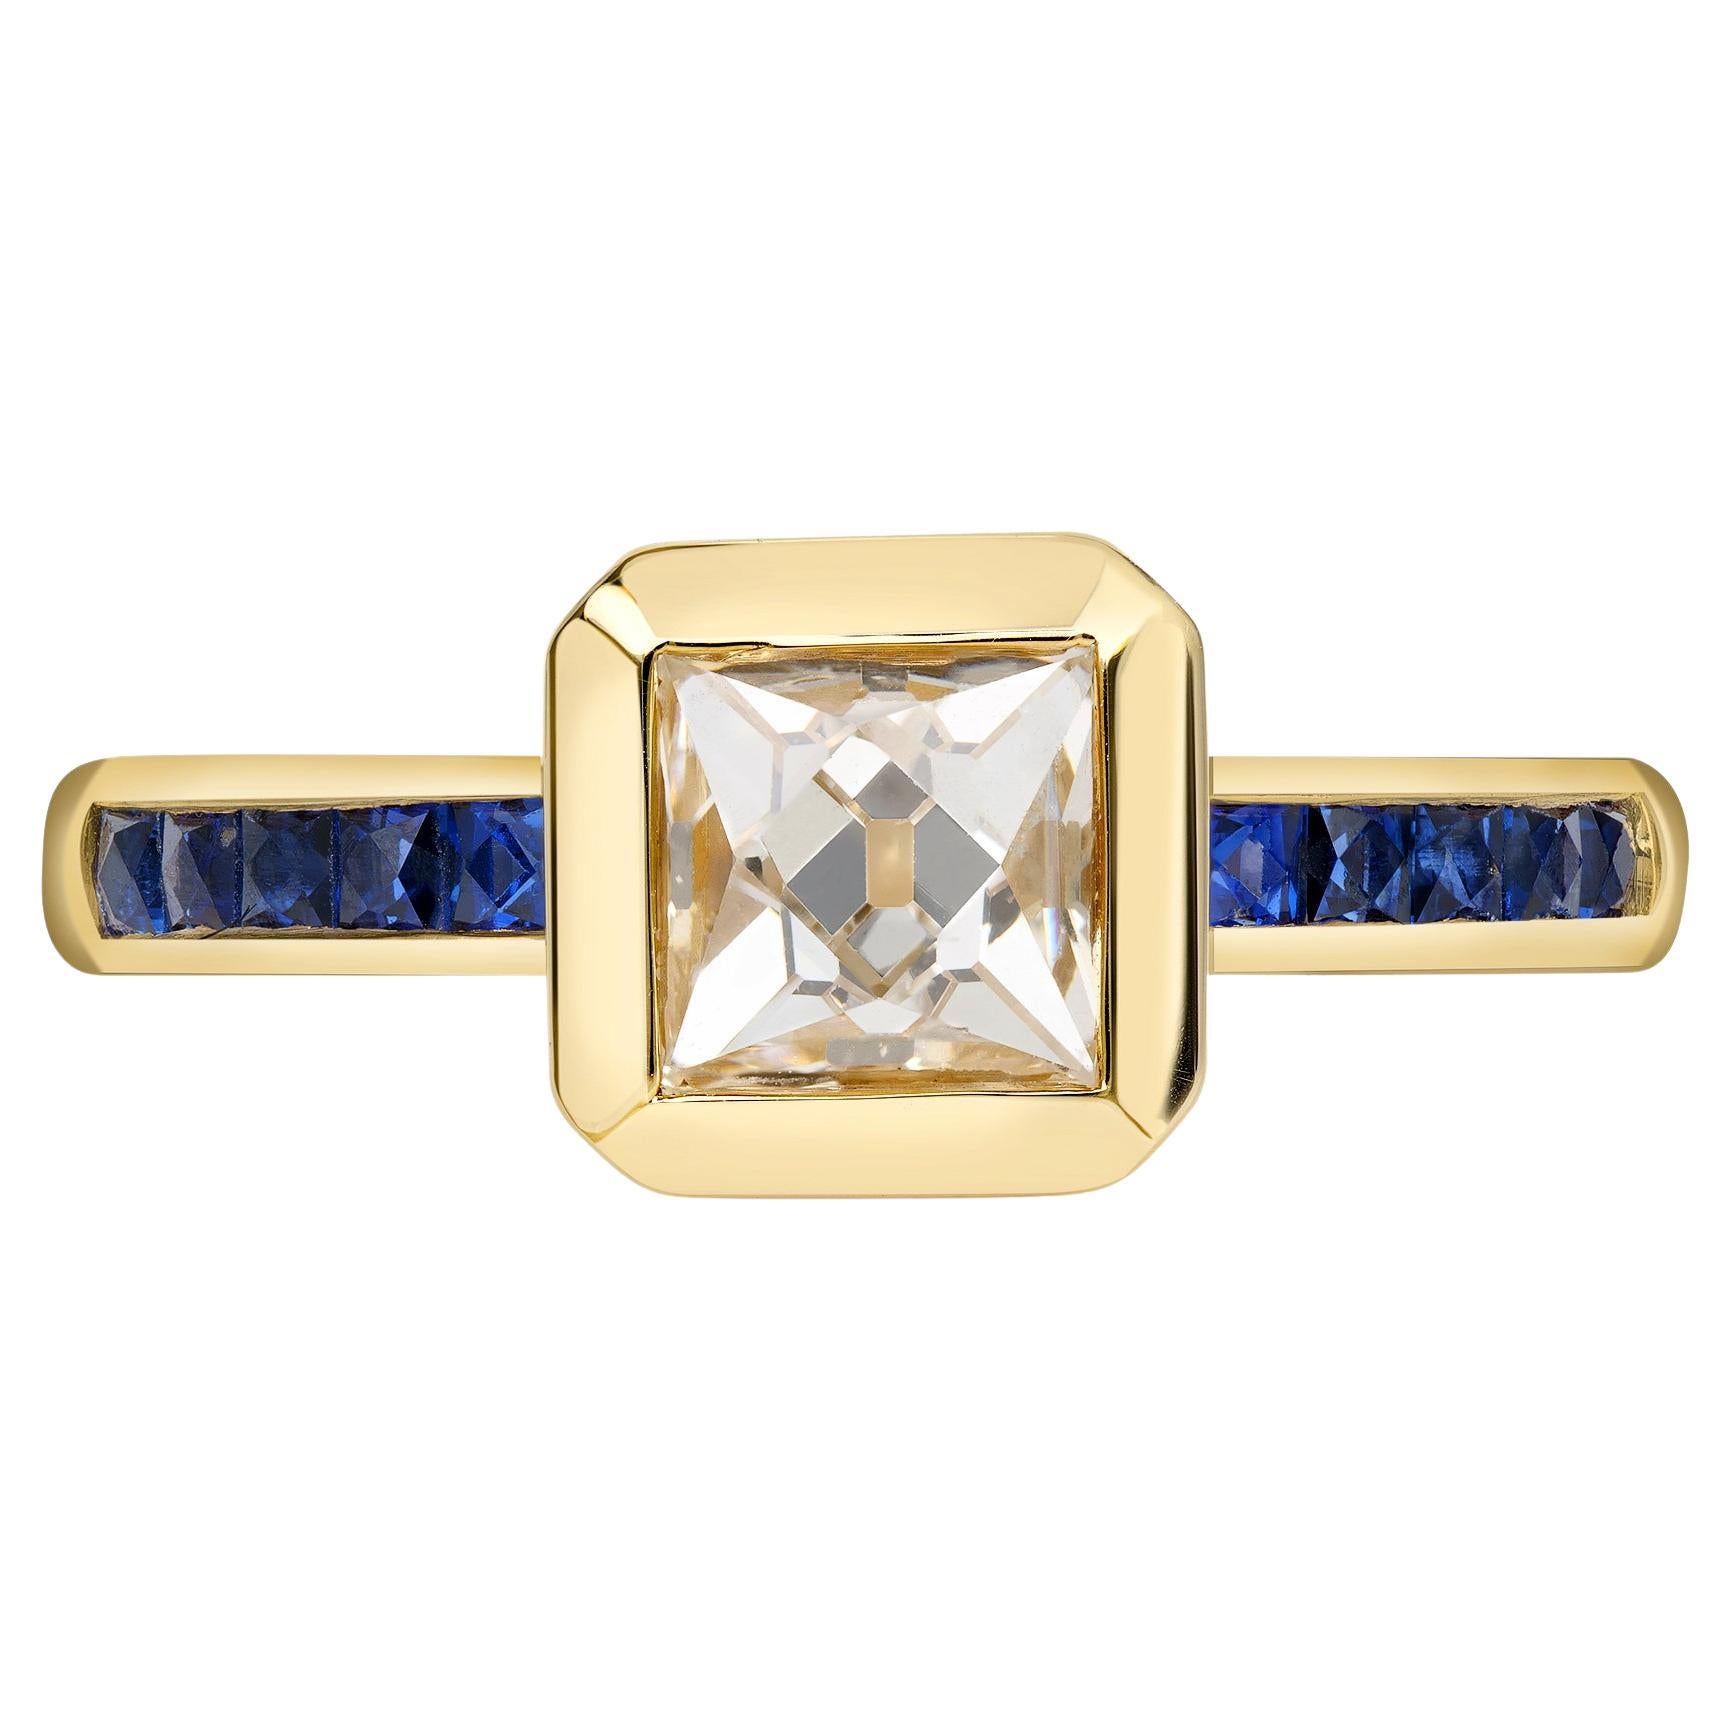 Handcrafted Karina French Cut Diamond and Sapphire Ring by Single Stone For Sale